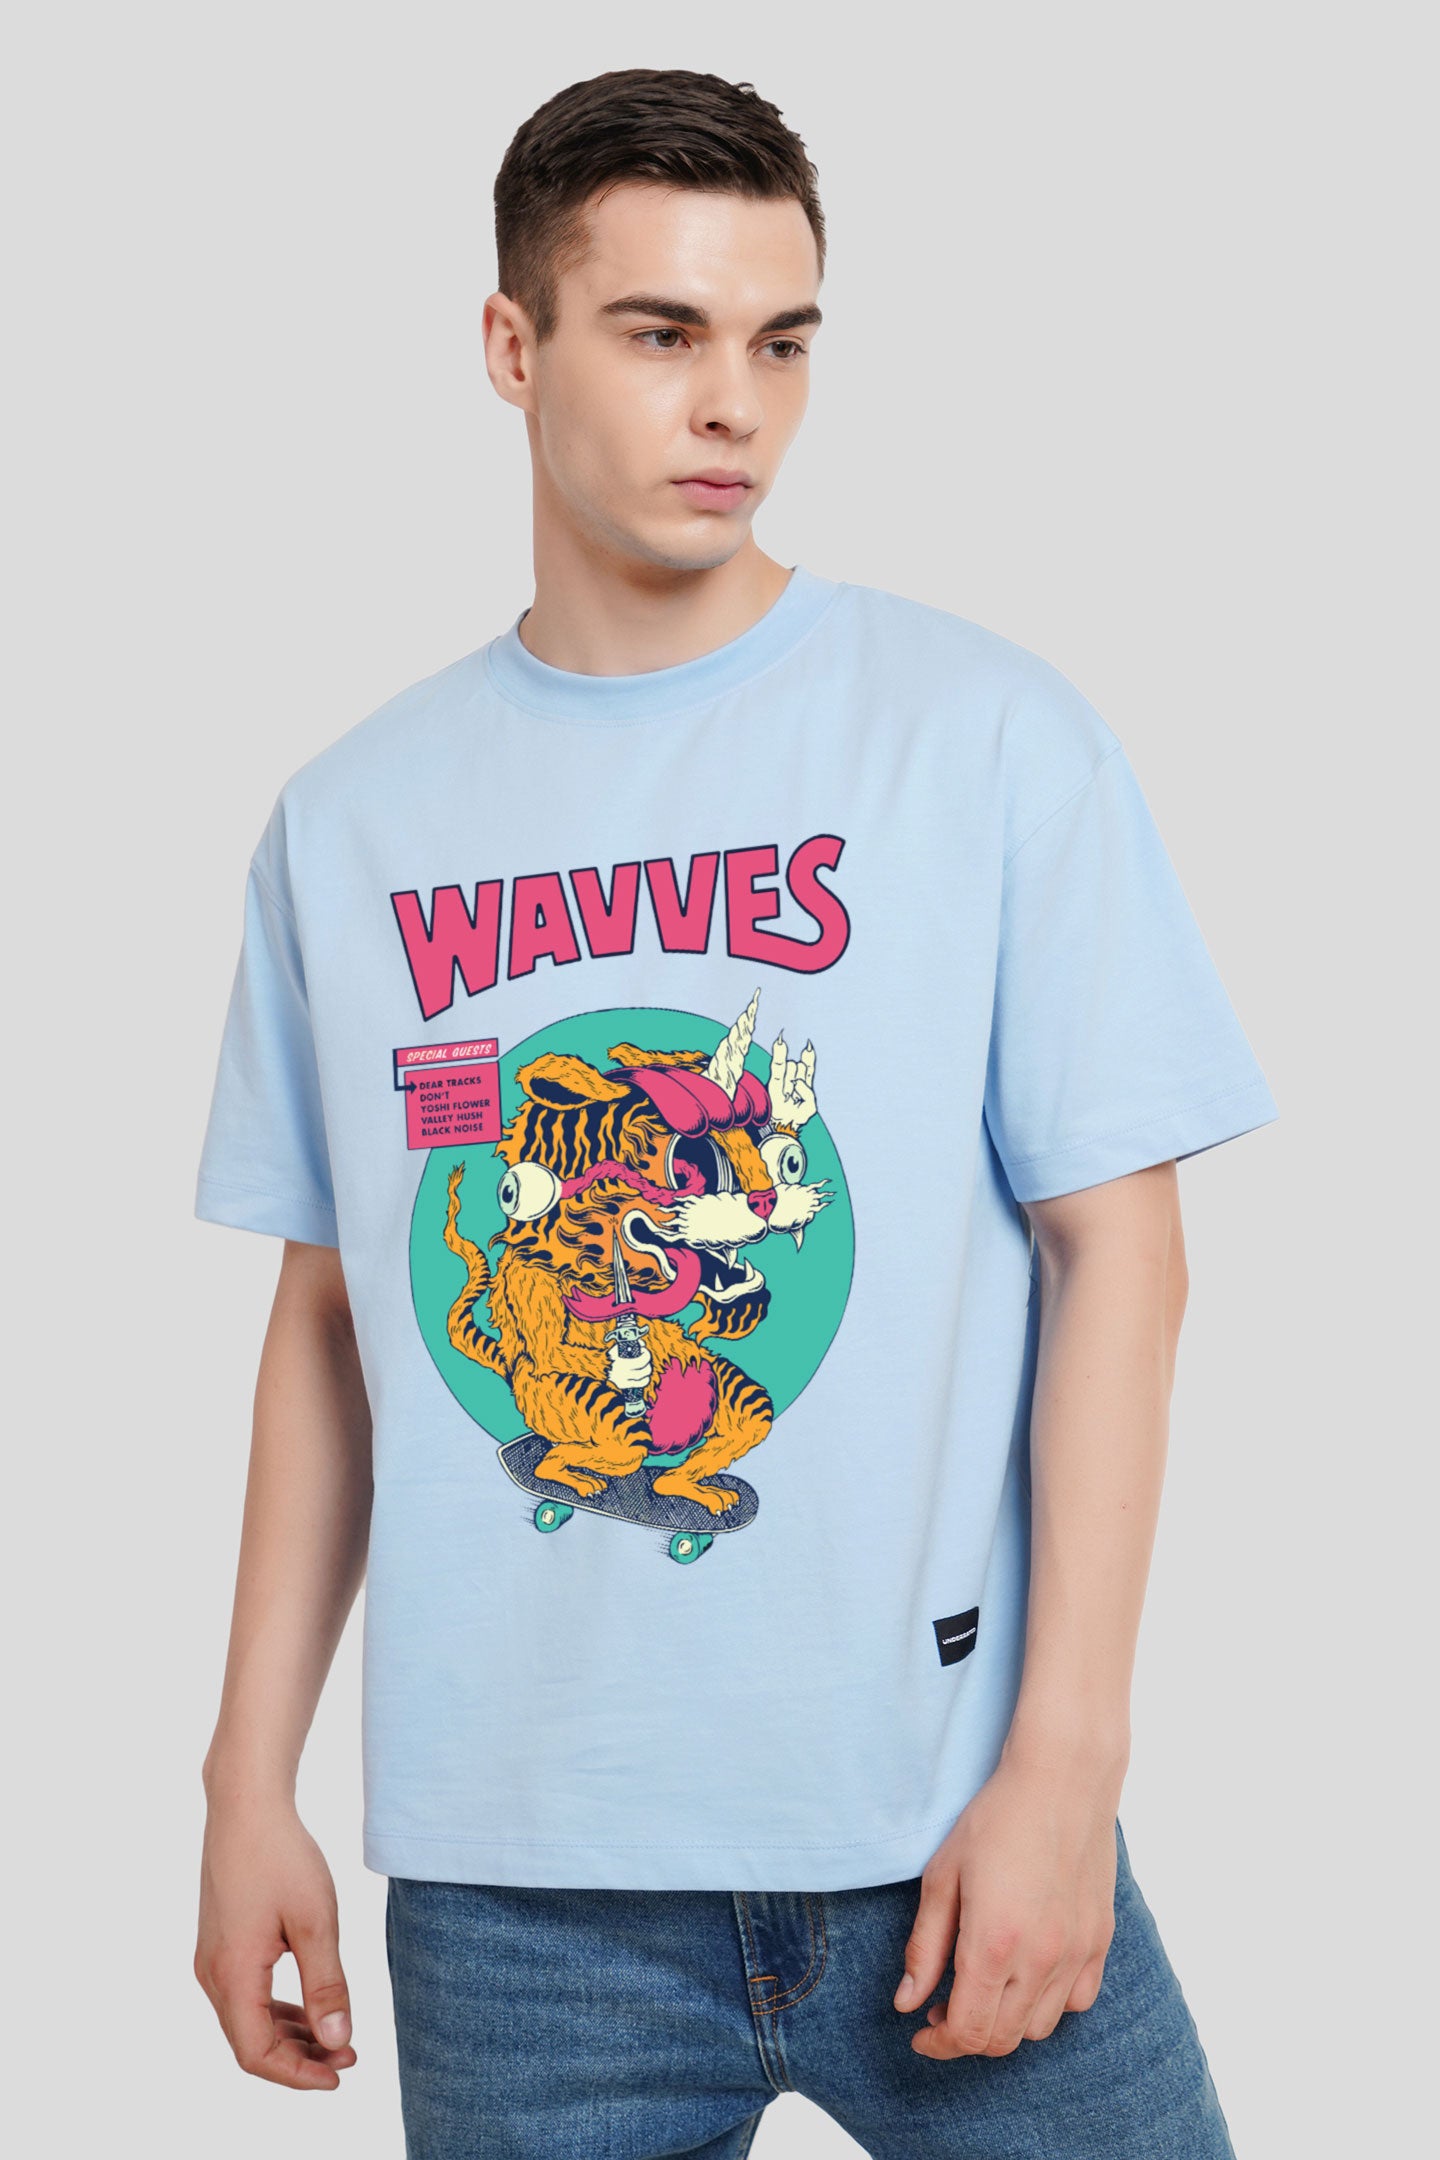 Wavves Powder Blue Printed T Shirt Men Oversized Fit With Front Design Pic 1